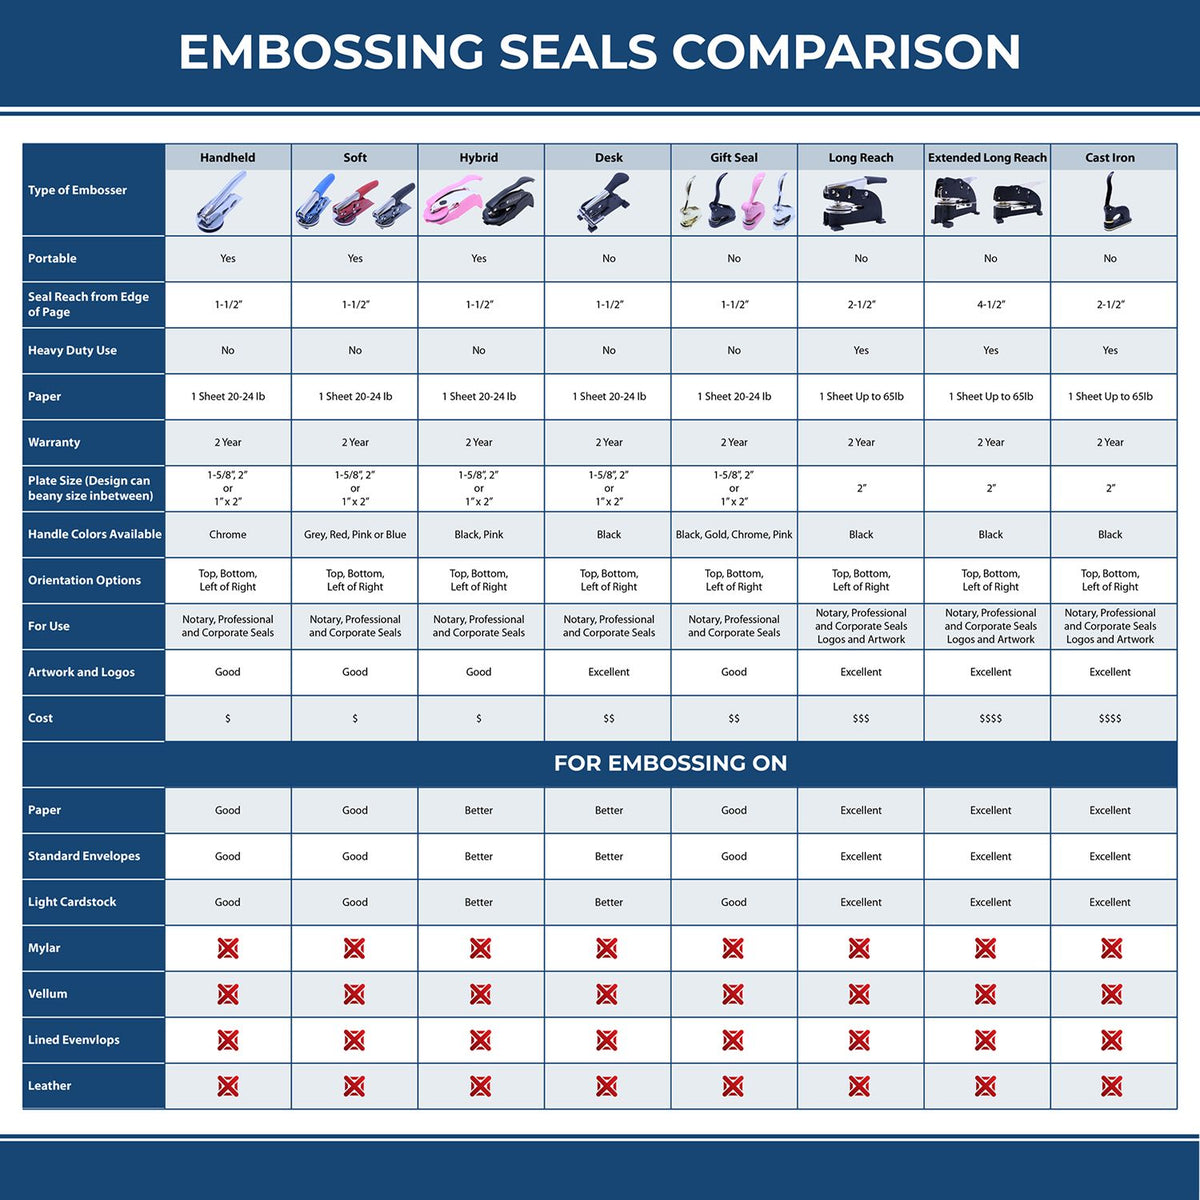 A comparison chart for the different types of mount models available for the Georgia Desk Architect Embossing Seal.